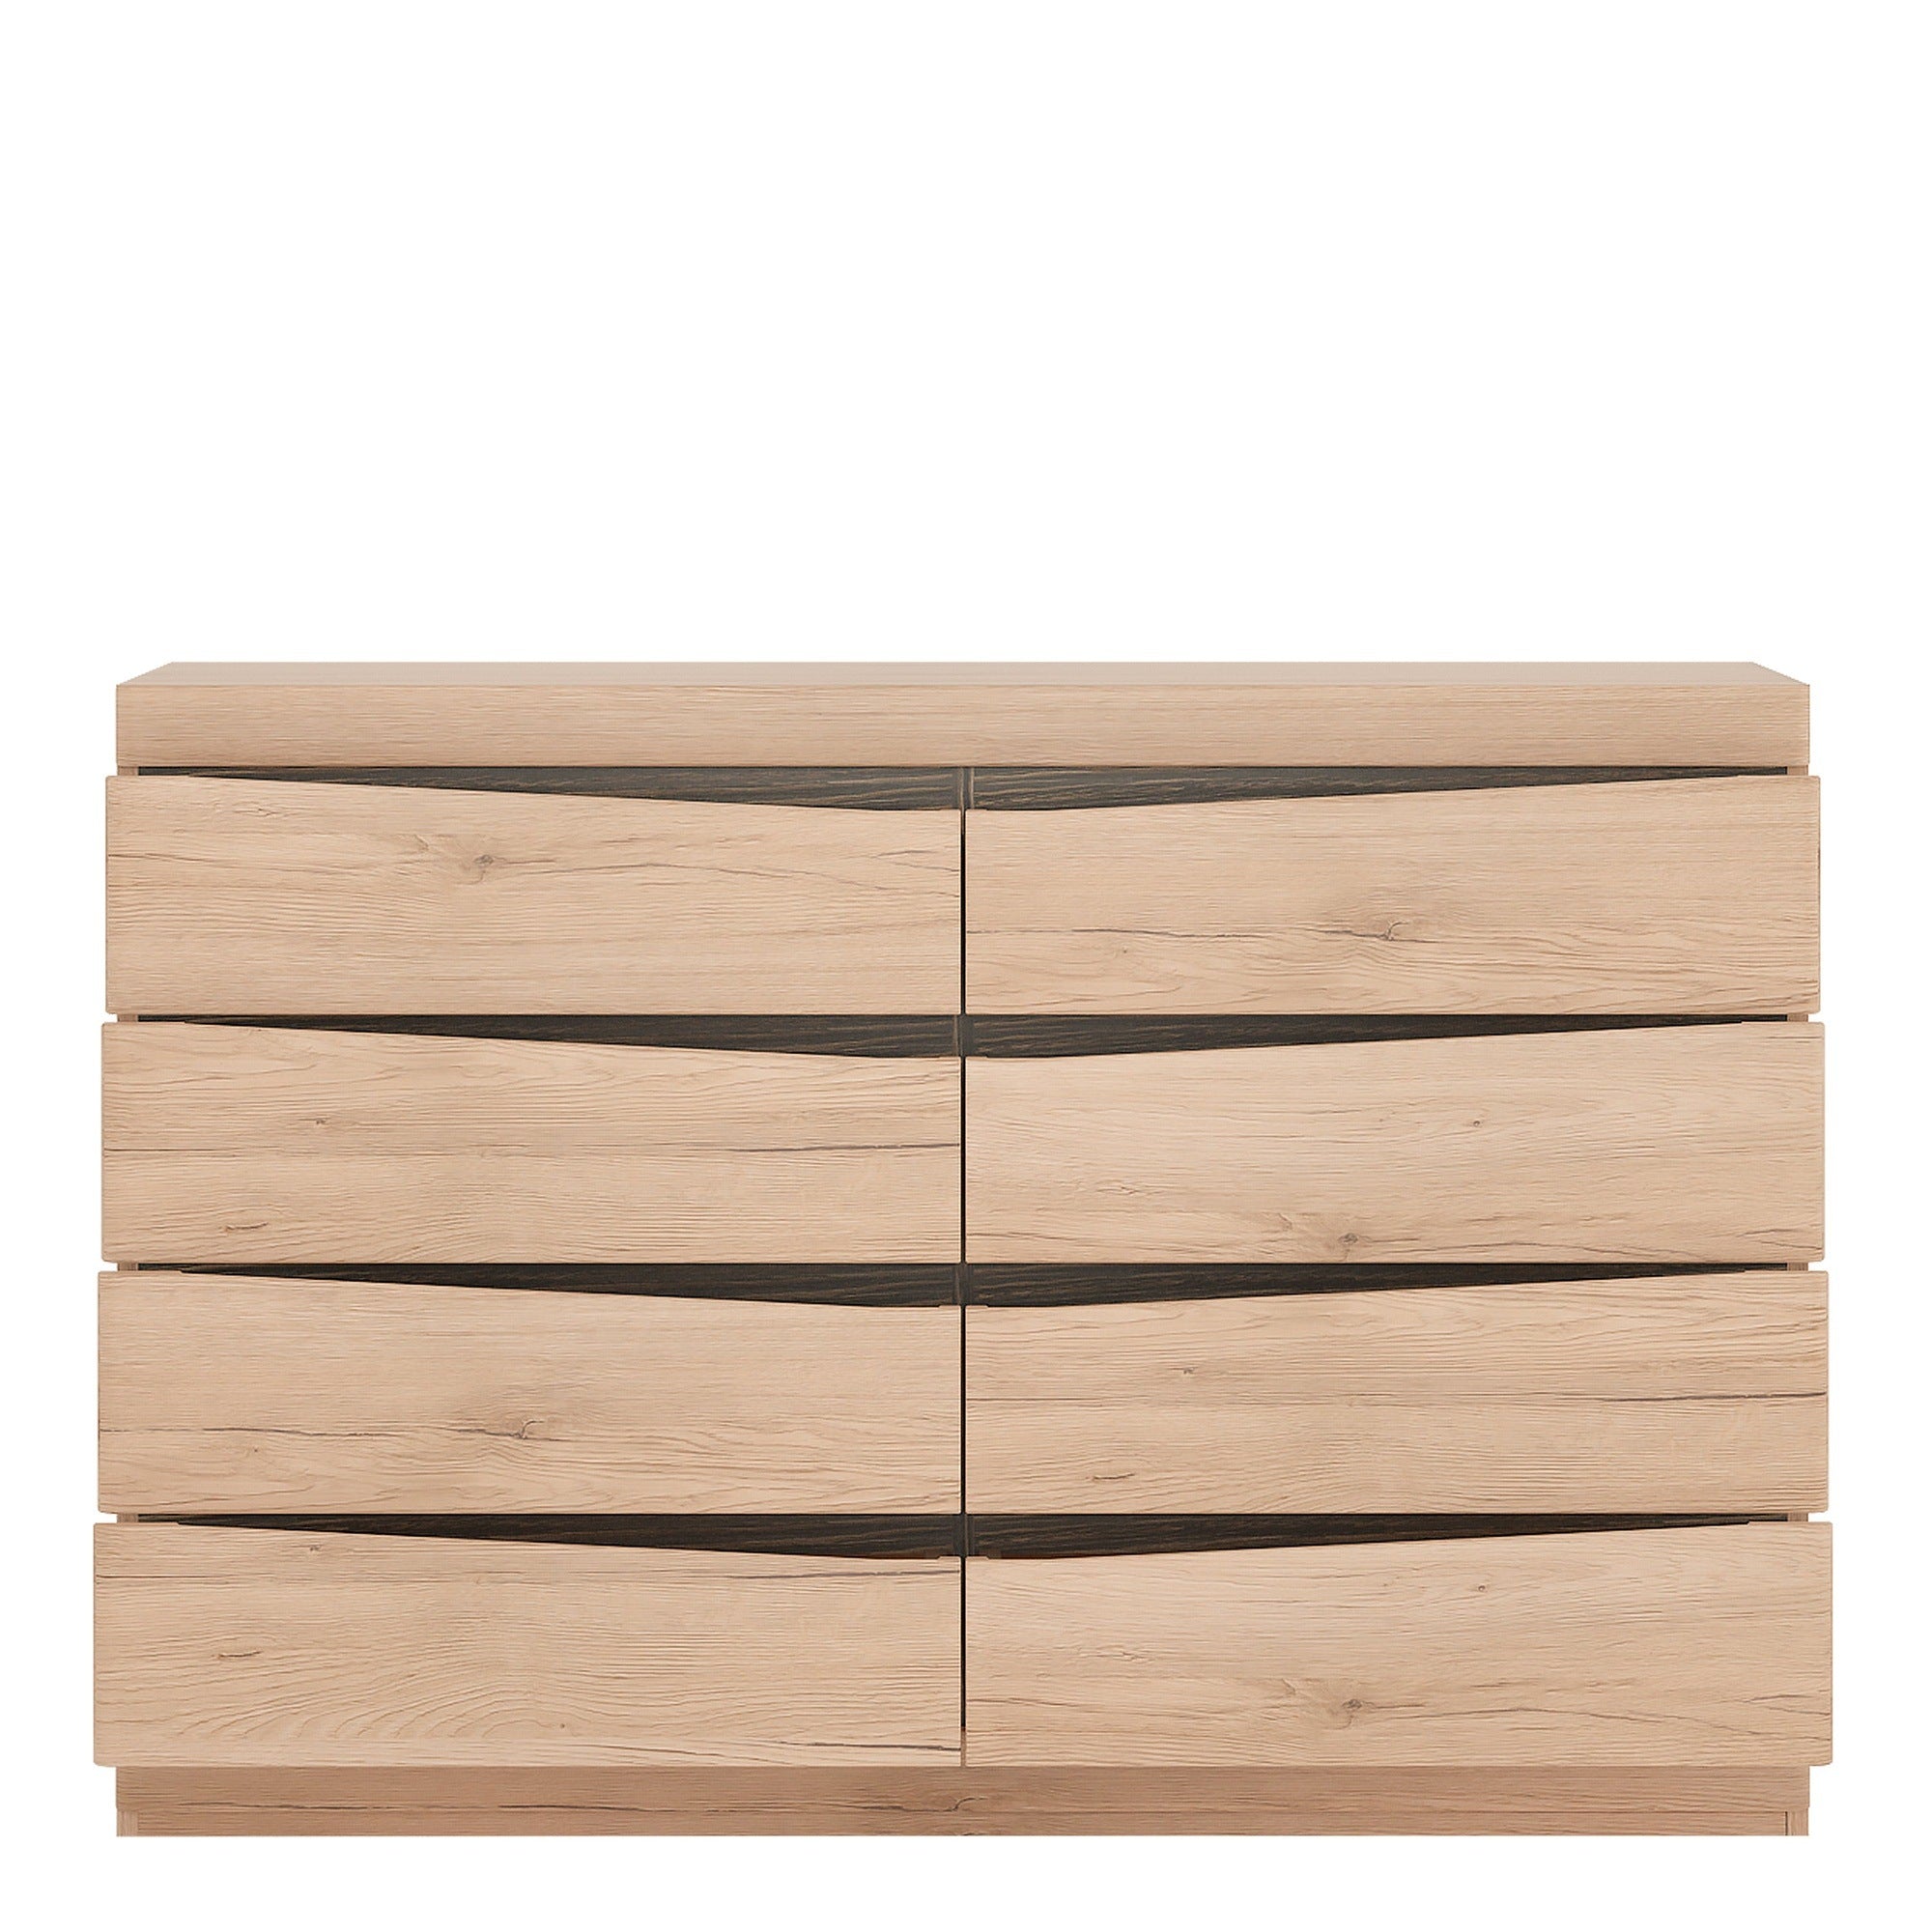 Notting hill 4 + 4 Wide Chest of Drawers in Oak